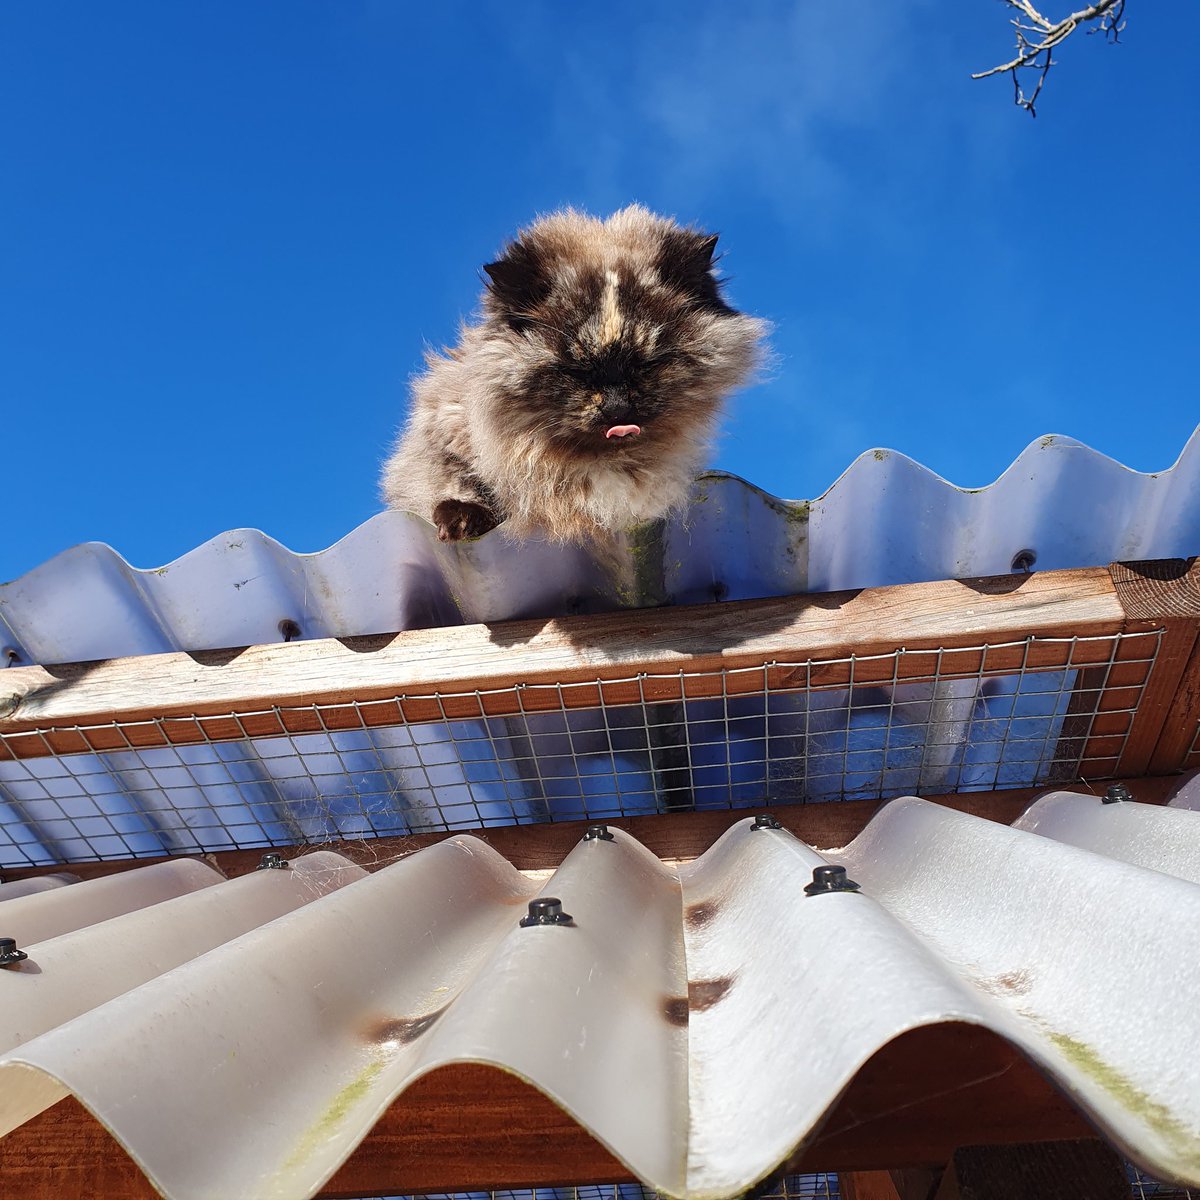 #MondayMotivation ~ when the weather is good Tula likes to climb on the roofs to have a good view at what is happening by the rehoming pens #inthecompanyofcats #superseniorcats #rescuecats #purrfectcats #catrescue #floofyfelines